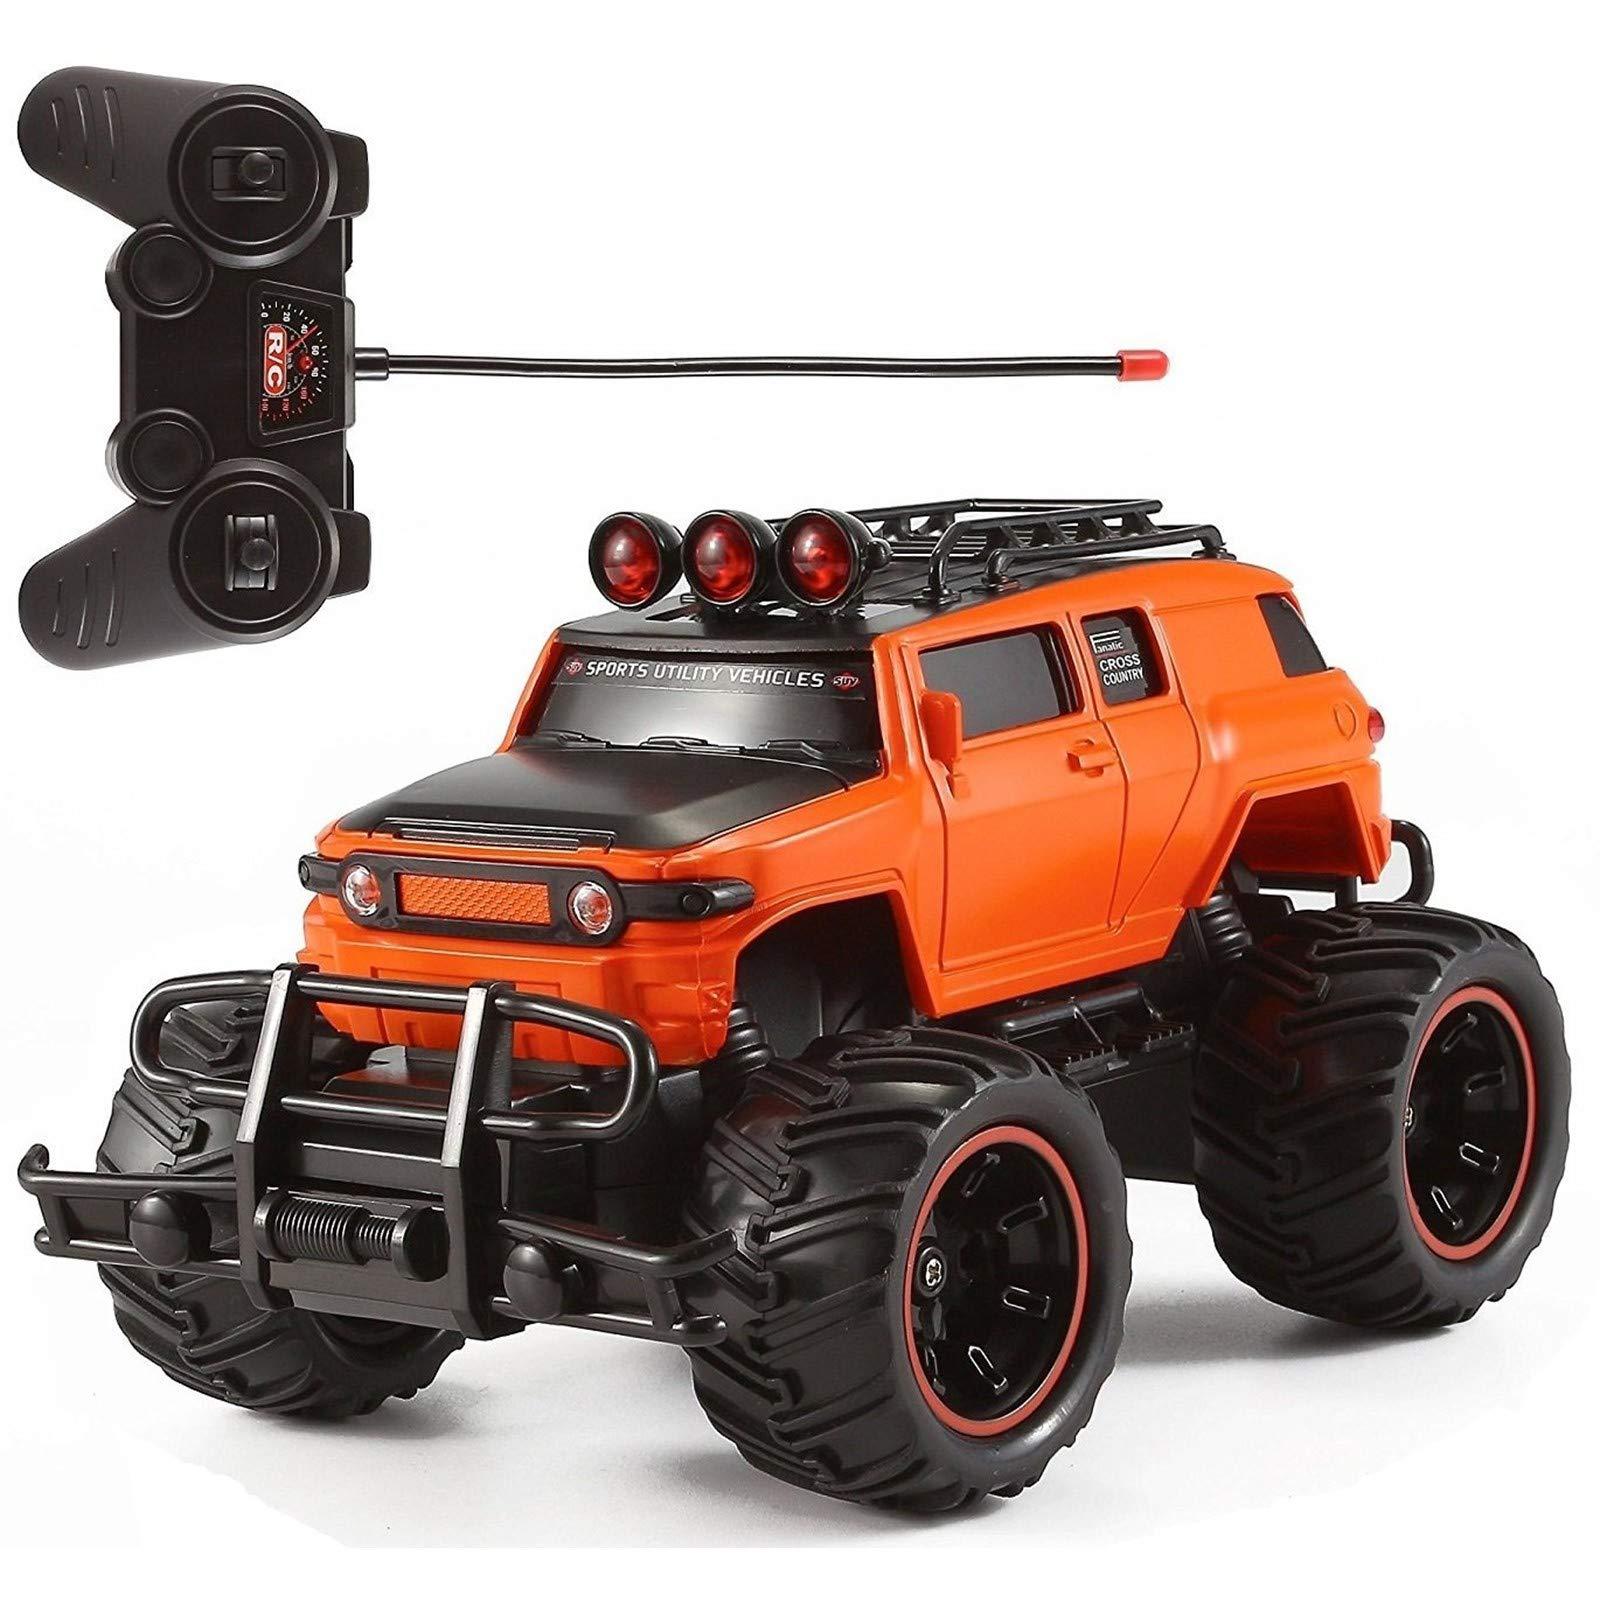 Monster Jam Remote Control Car: Realistic design and easy control make these mini monster trucks a must-have toy! 